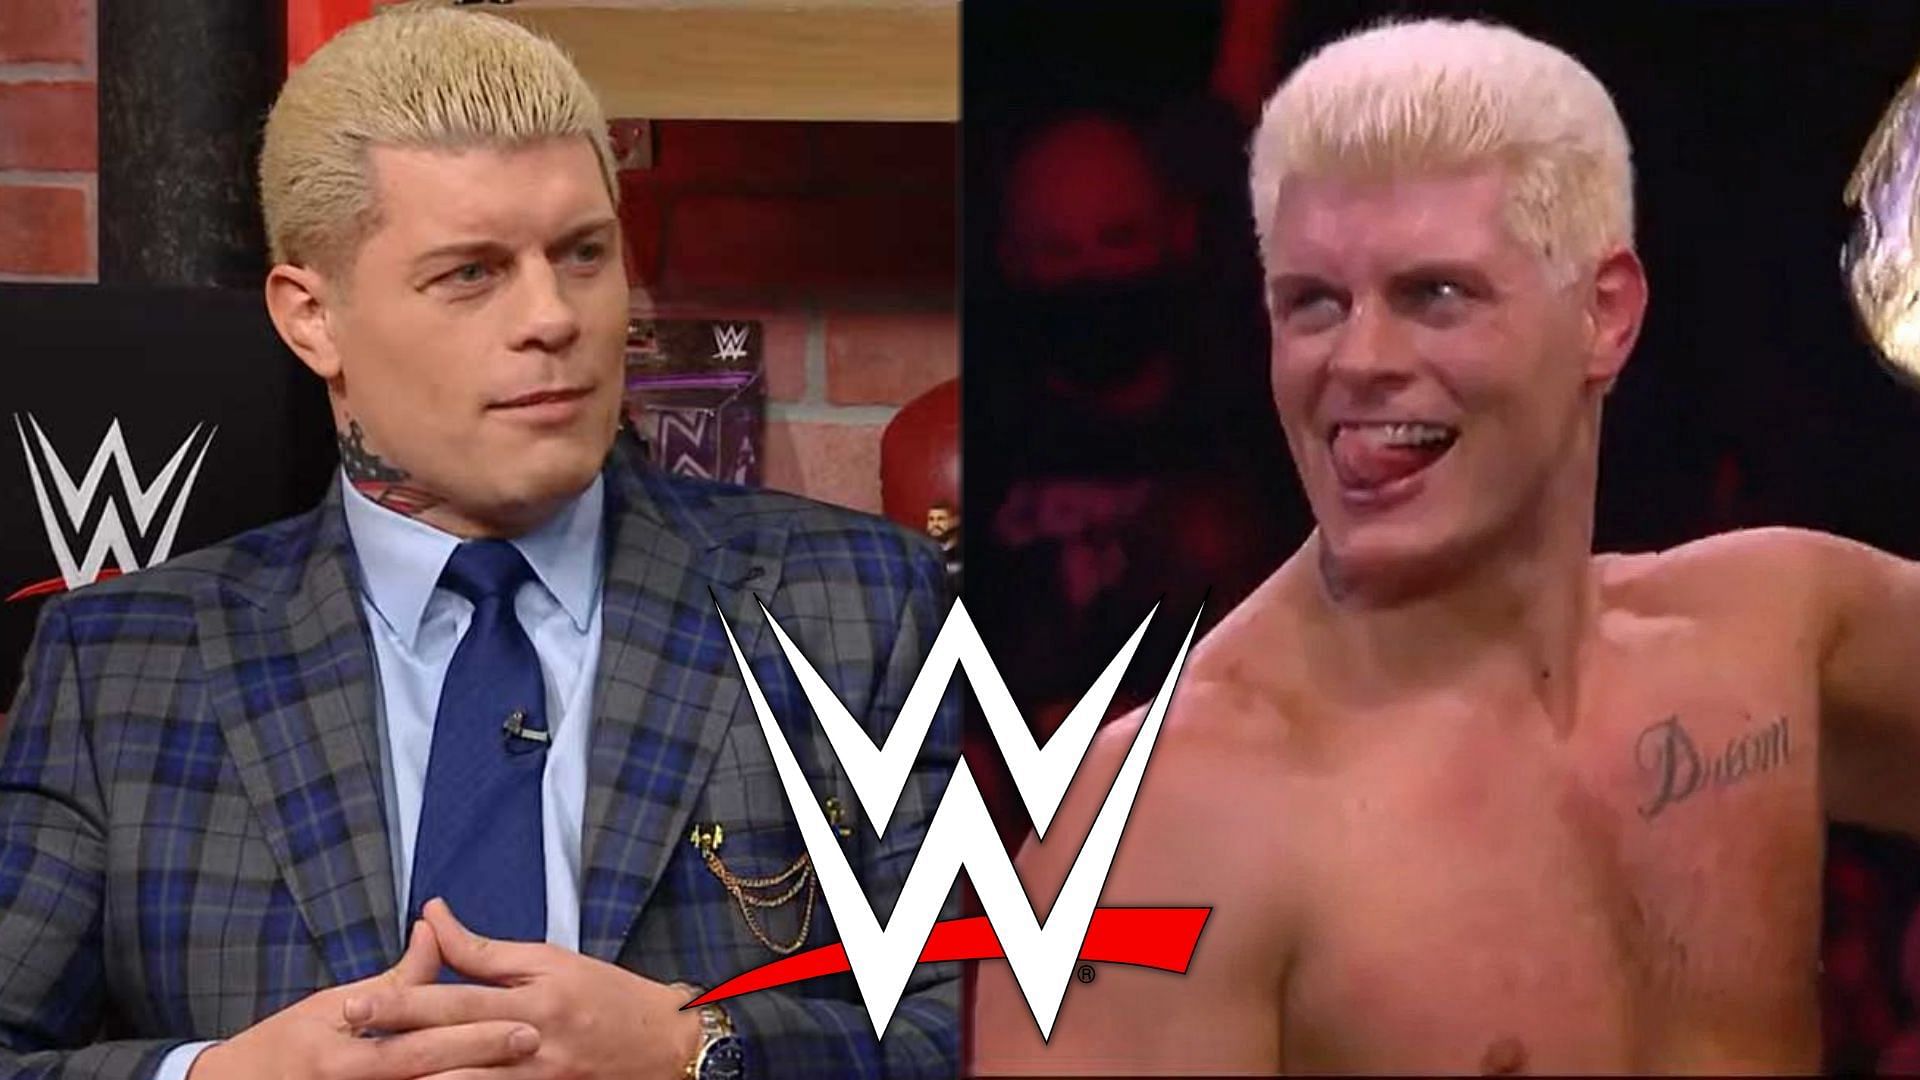 Cody Rhodes shockingly jumped to WWE earlier this year.